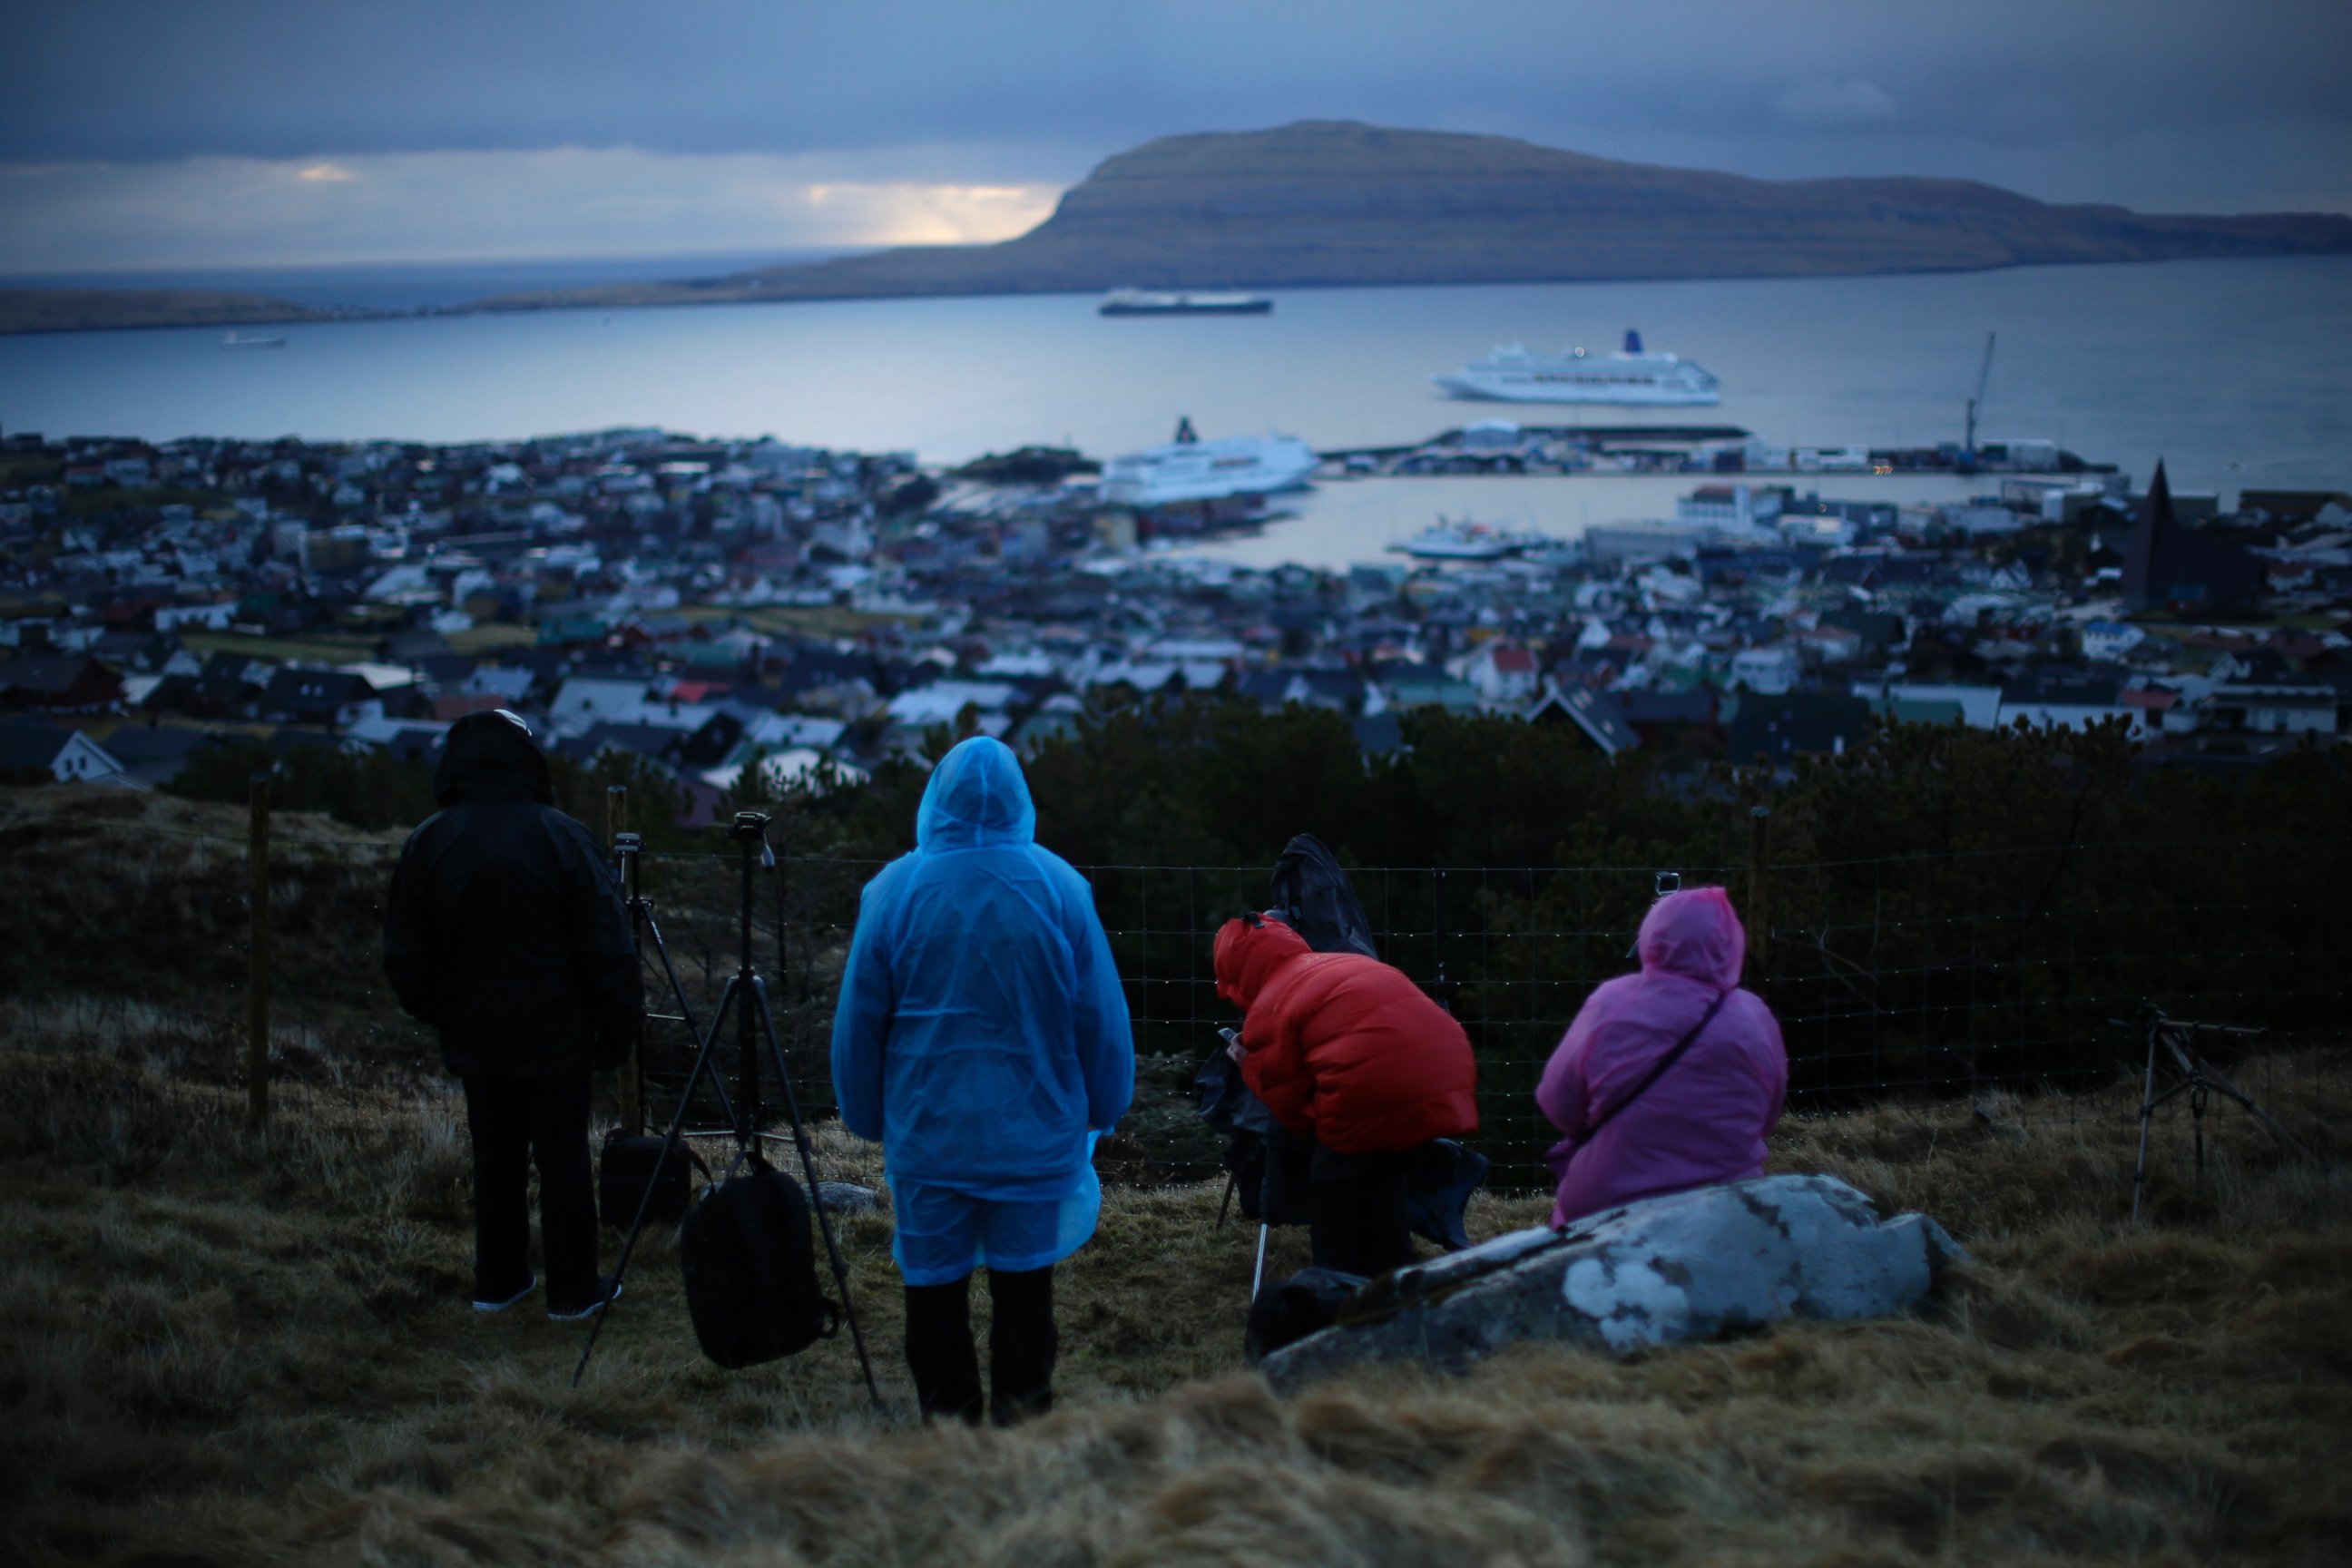 PHOTO: People wait for the start of a total solar eclipse on a hill beside a hotel overlooking the sea and Torshavn, the capital city of the Faeroe Islands, March 20, 2015.